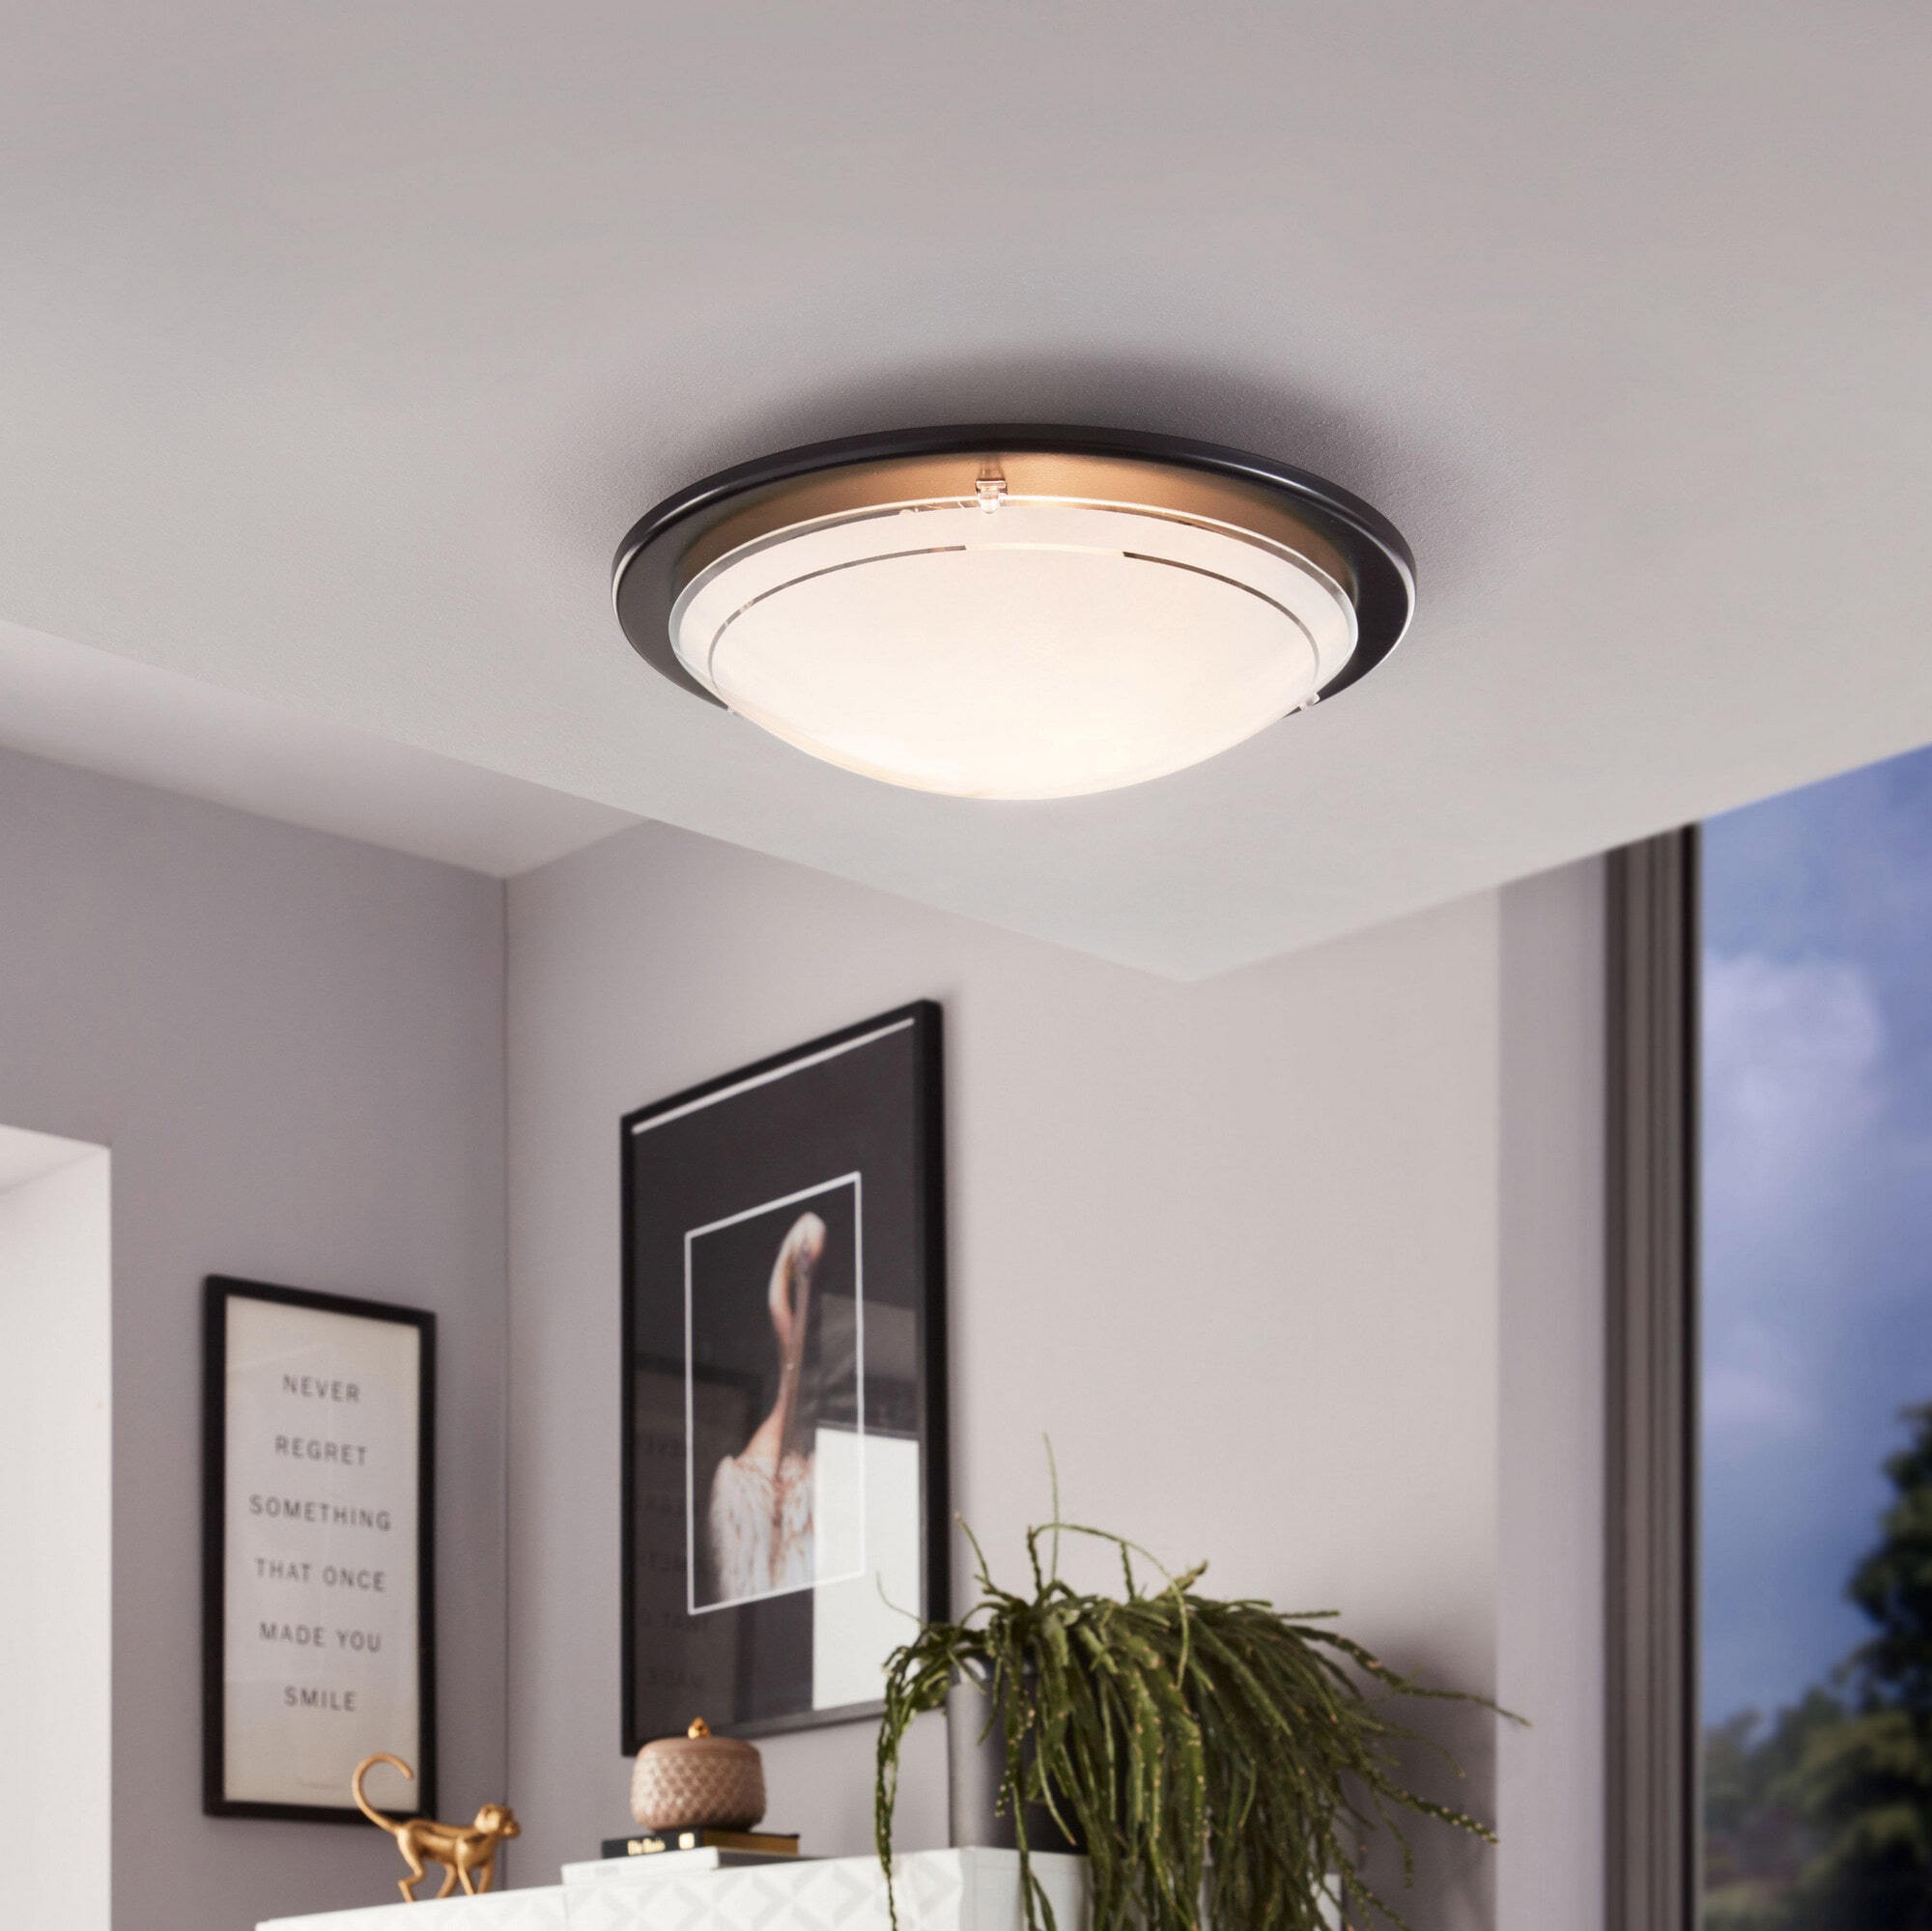 16,95 € Free Shipping | Indoor ceiling light Eglo Planet 1 60W Ø 29 cm. Steel, glass and lacquered glass. White and black Color